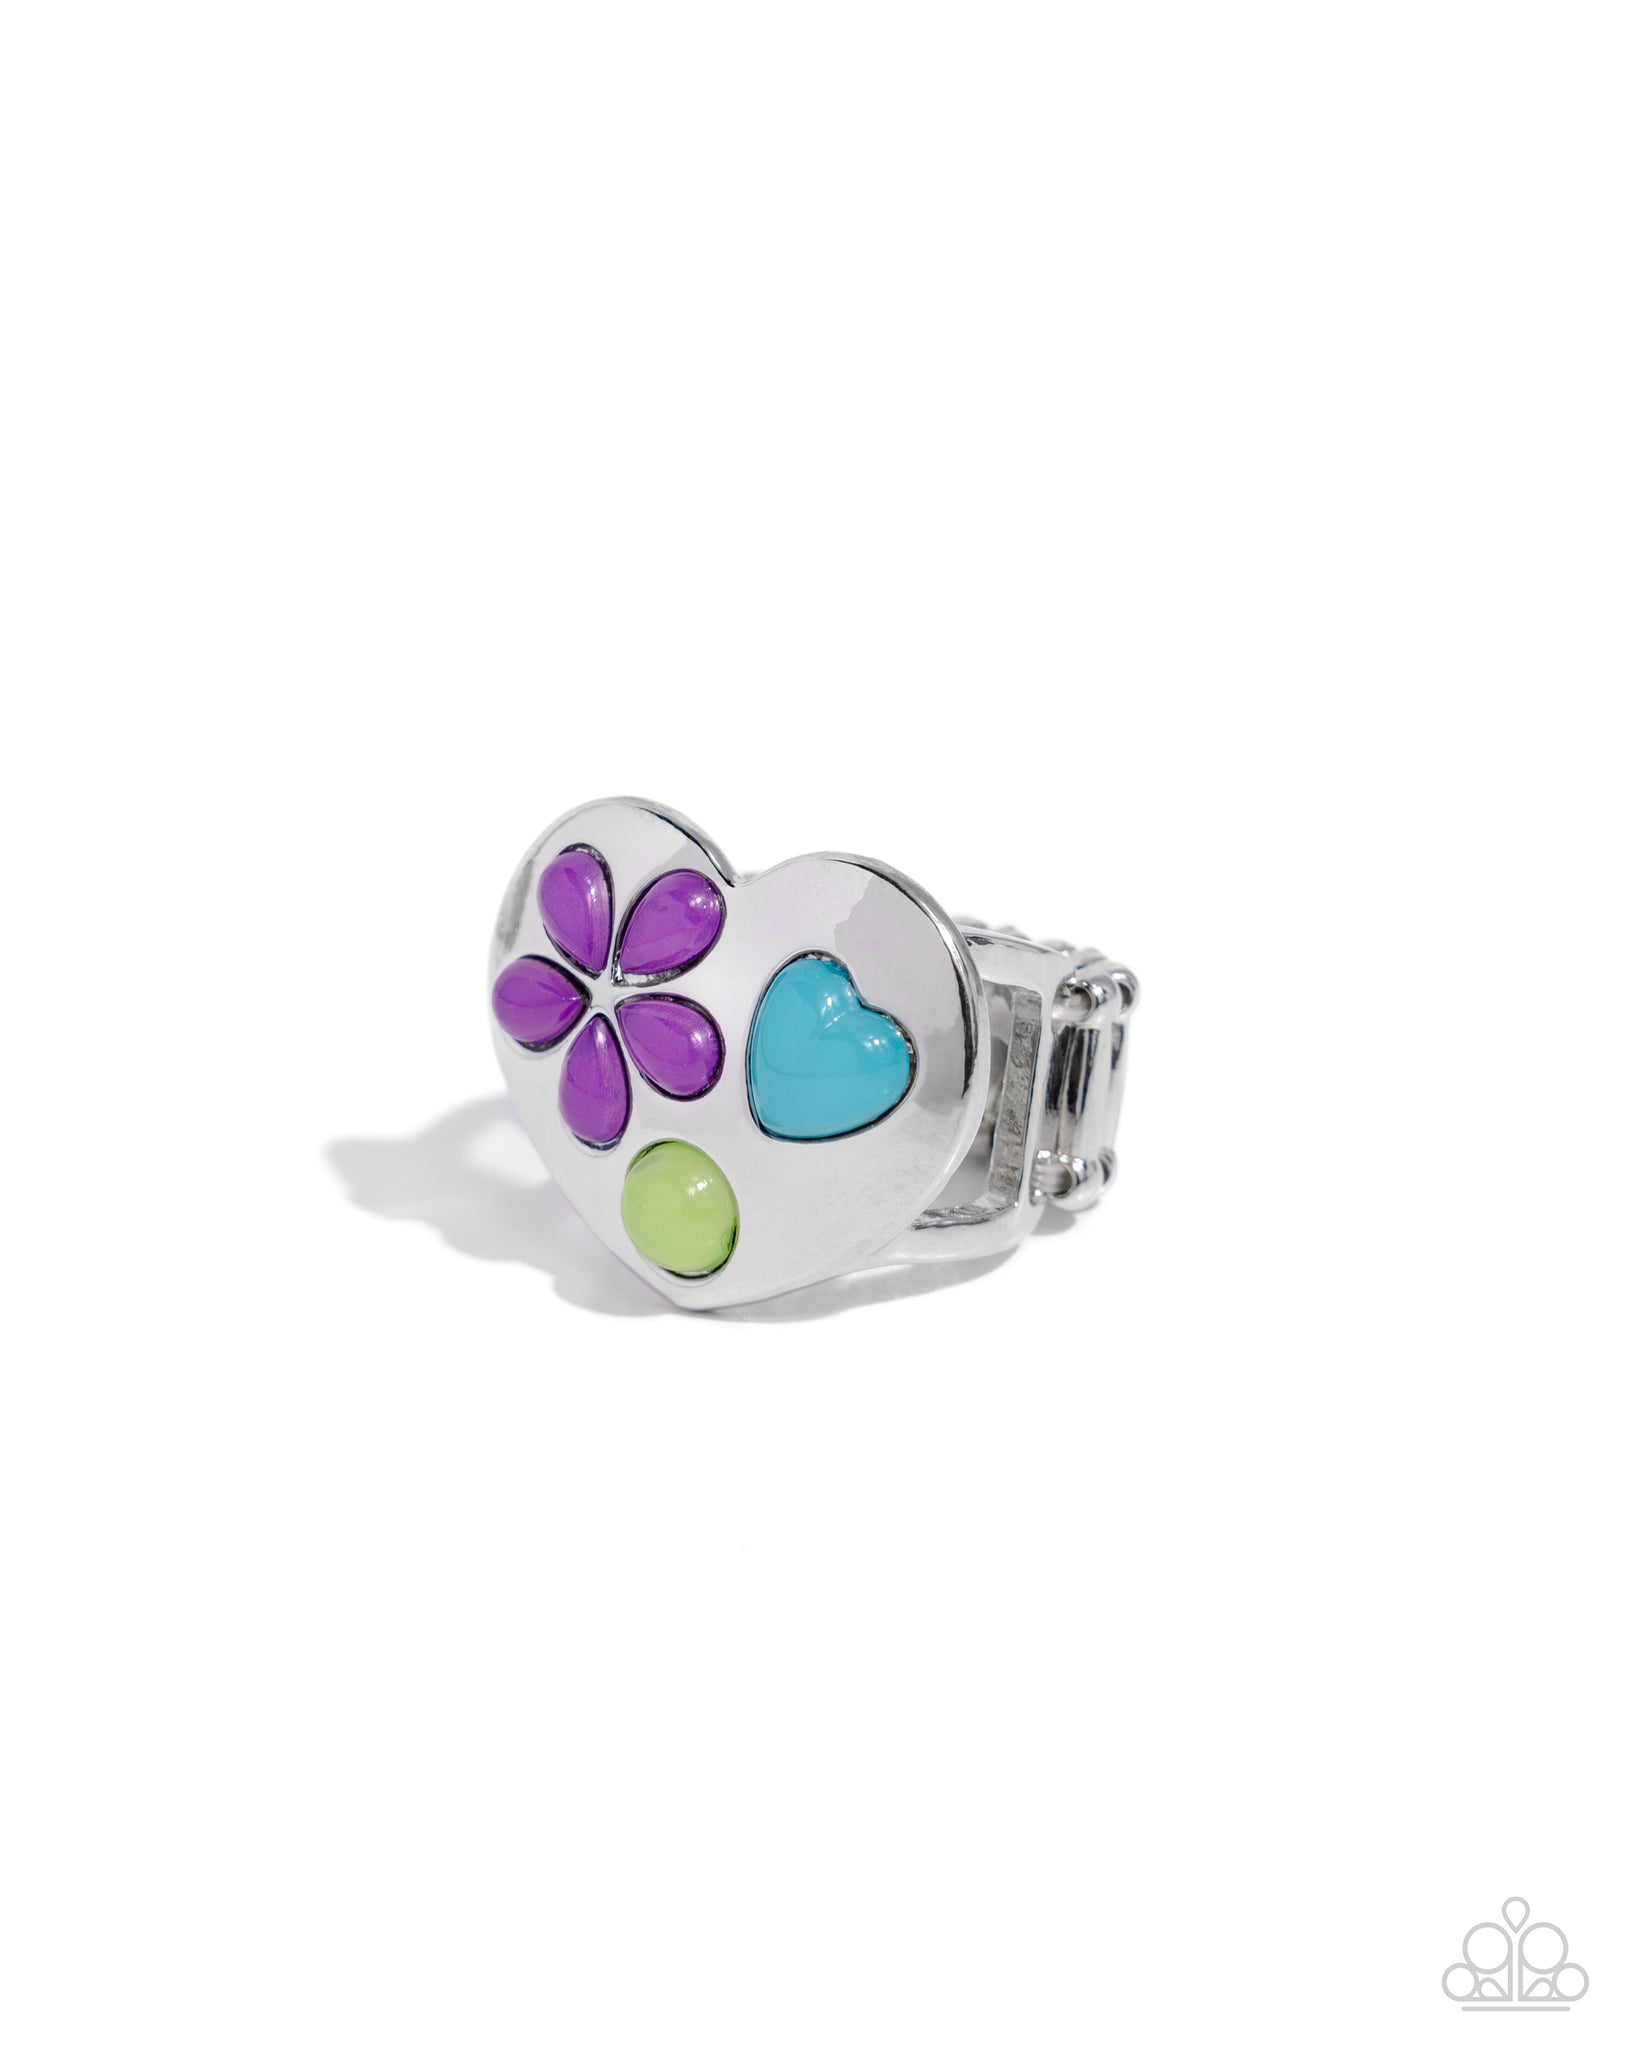 Spirited Shapes Ring (Red, Purple)